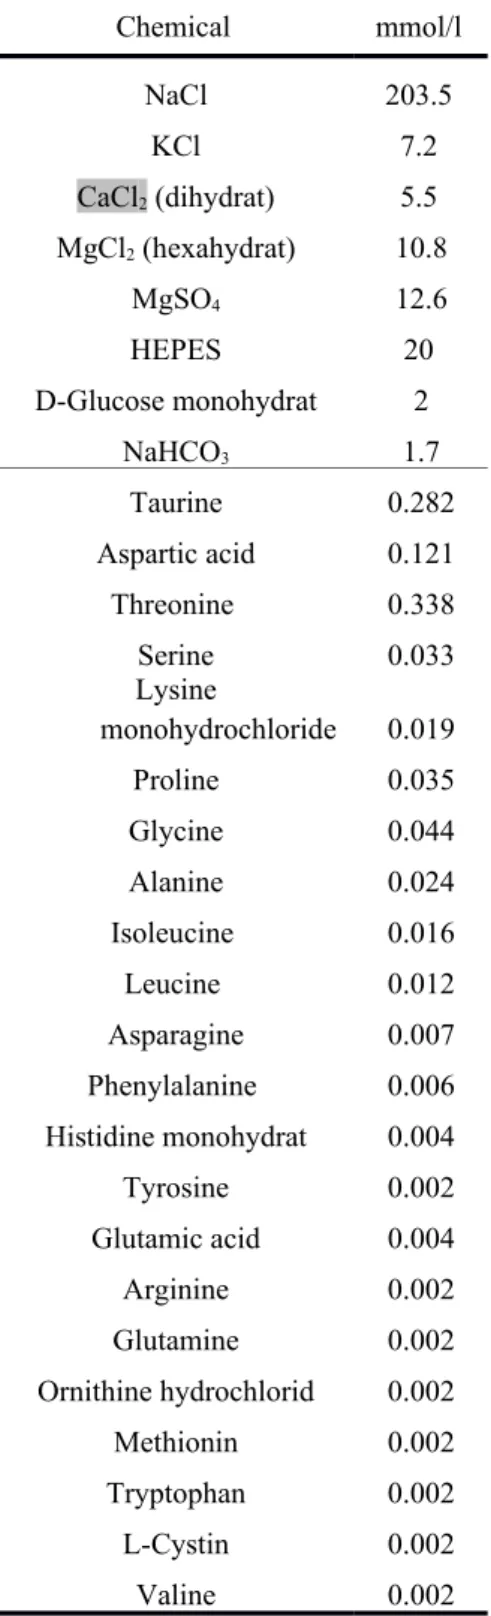 Table S1 Chemical buffer composition used for experiments with isolated gill and outer  mantle tissue Chemical mmol/l NaCl 203.5 KCl 7.2 CaCl 2  (dihydrat) 5.5 MgCl 2  (hexahydrat) 10.8 MgSO 4 12.6 HEPES 20 D-Glucose monohydrat 2 NaHCO 3 1.7 Taurine 0.282 